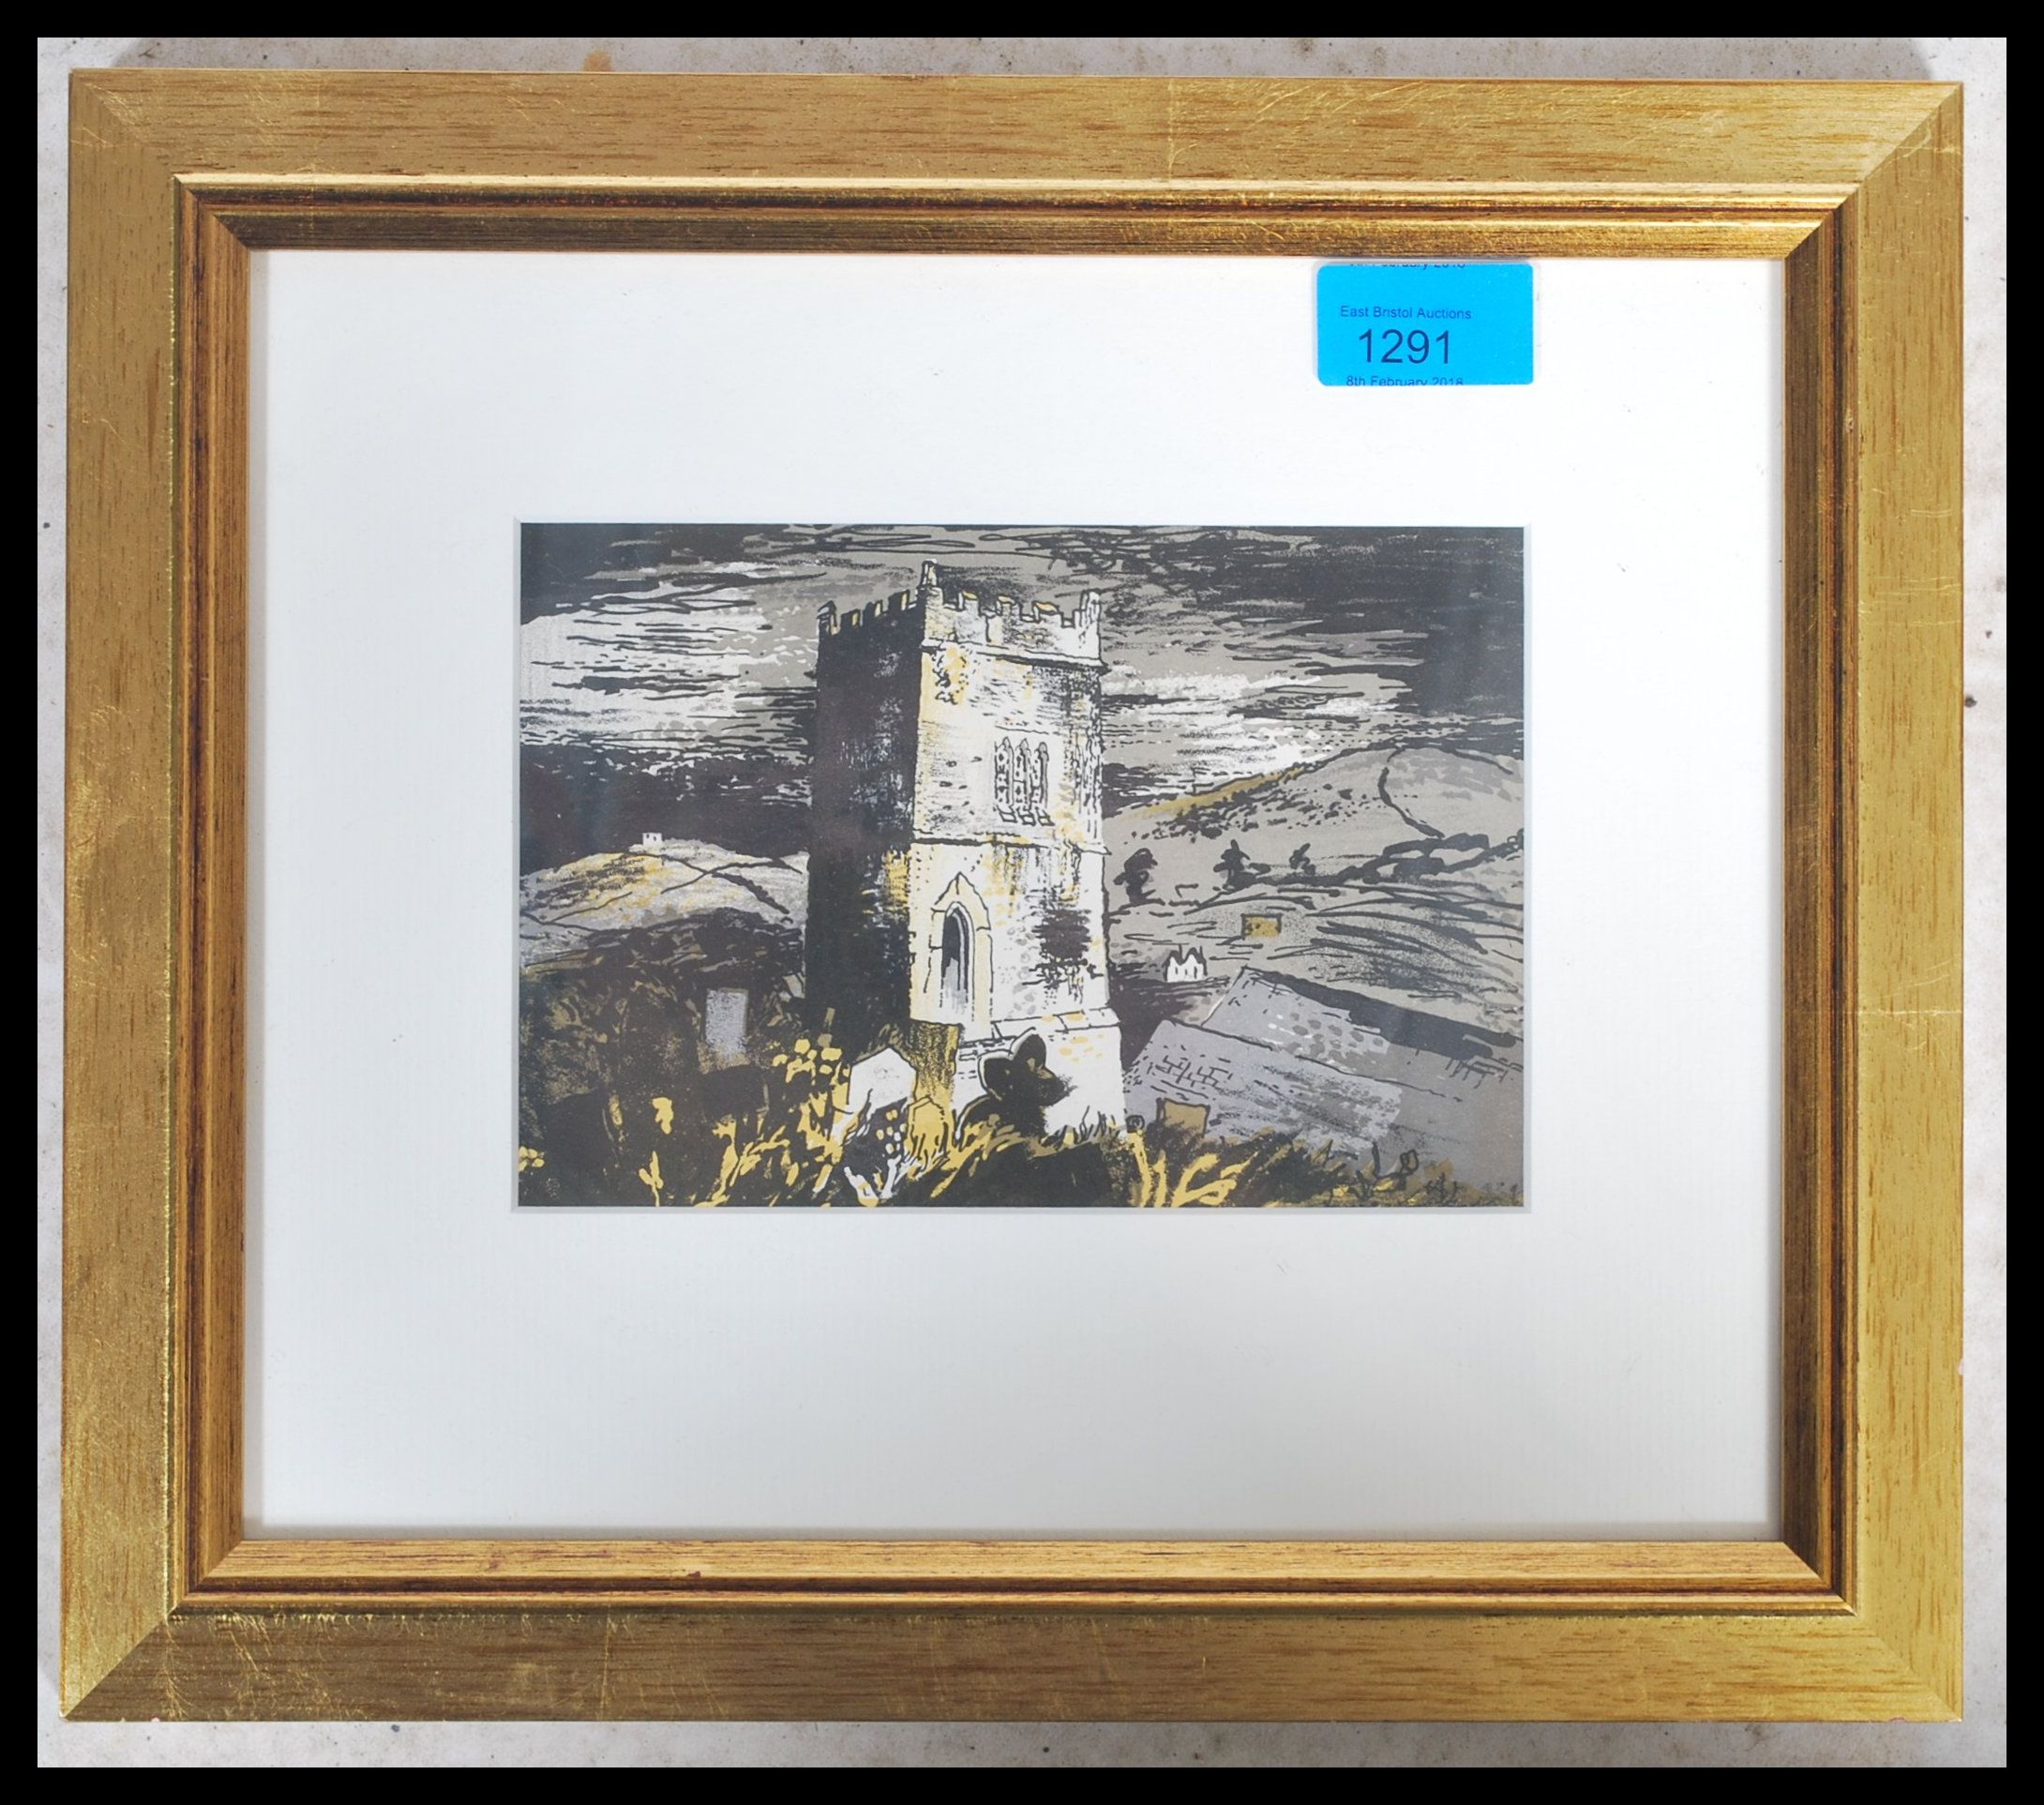 John Piper (1903-1992), colour lithograph ' Tolland ' framed and glazed Measure 12cm High x 17.5cm